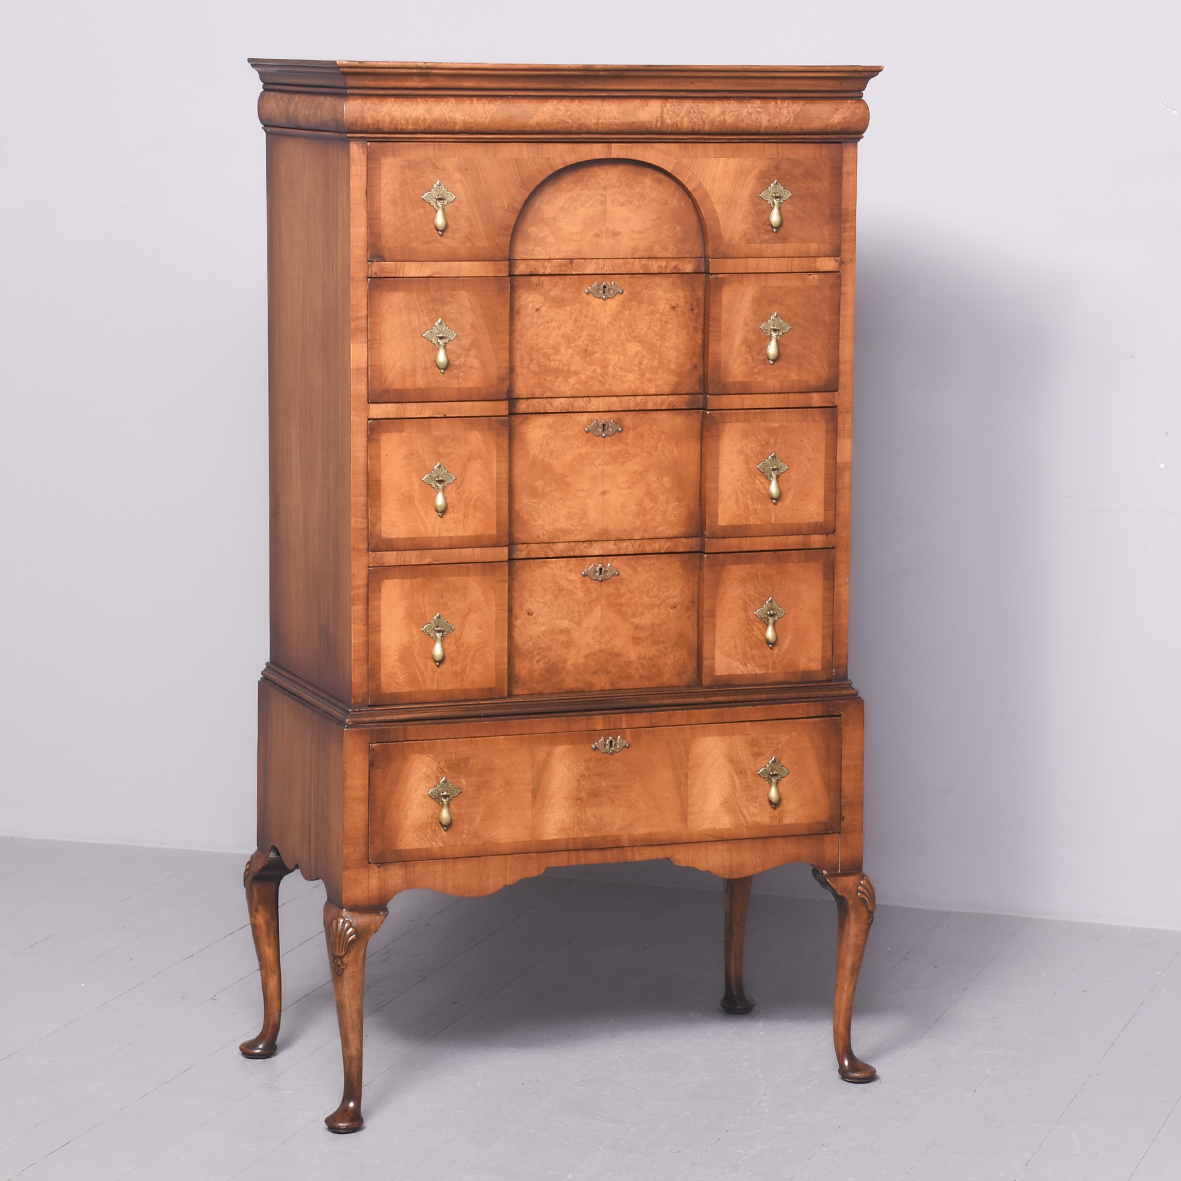 George II Style Burr Walnut Chest on Stand 20th century Antique Chest Of Drawers